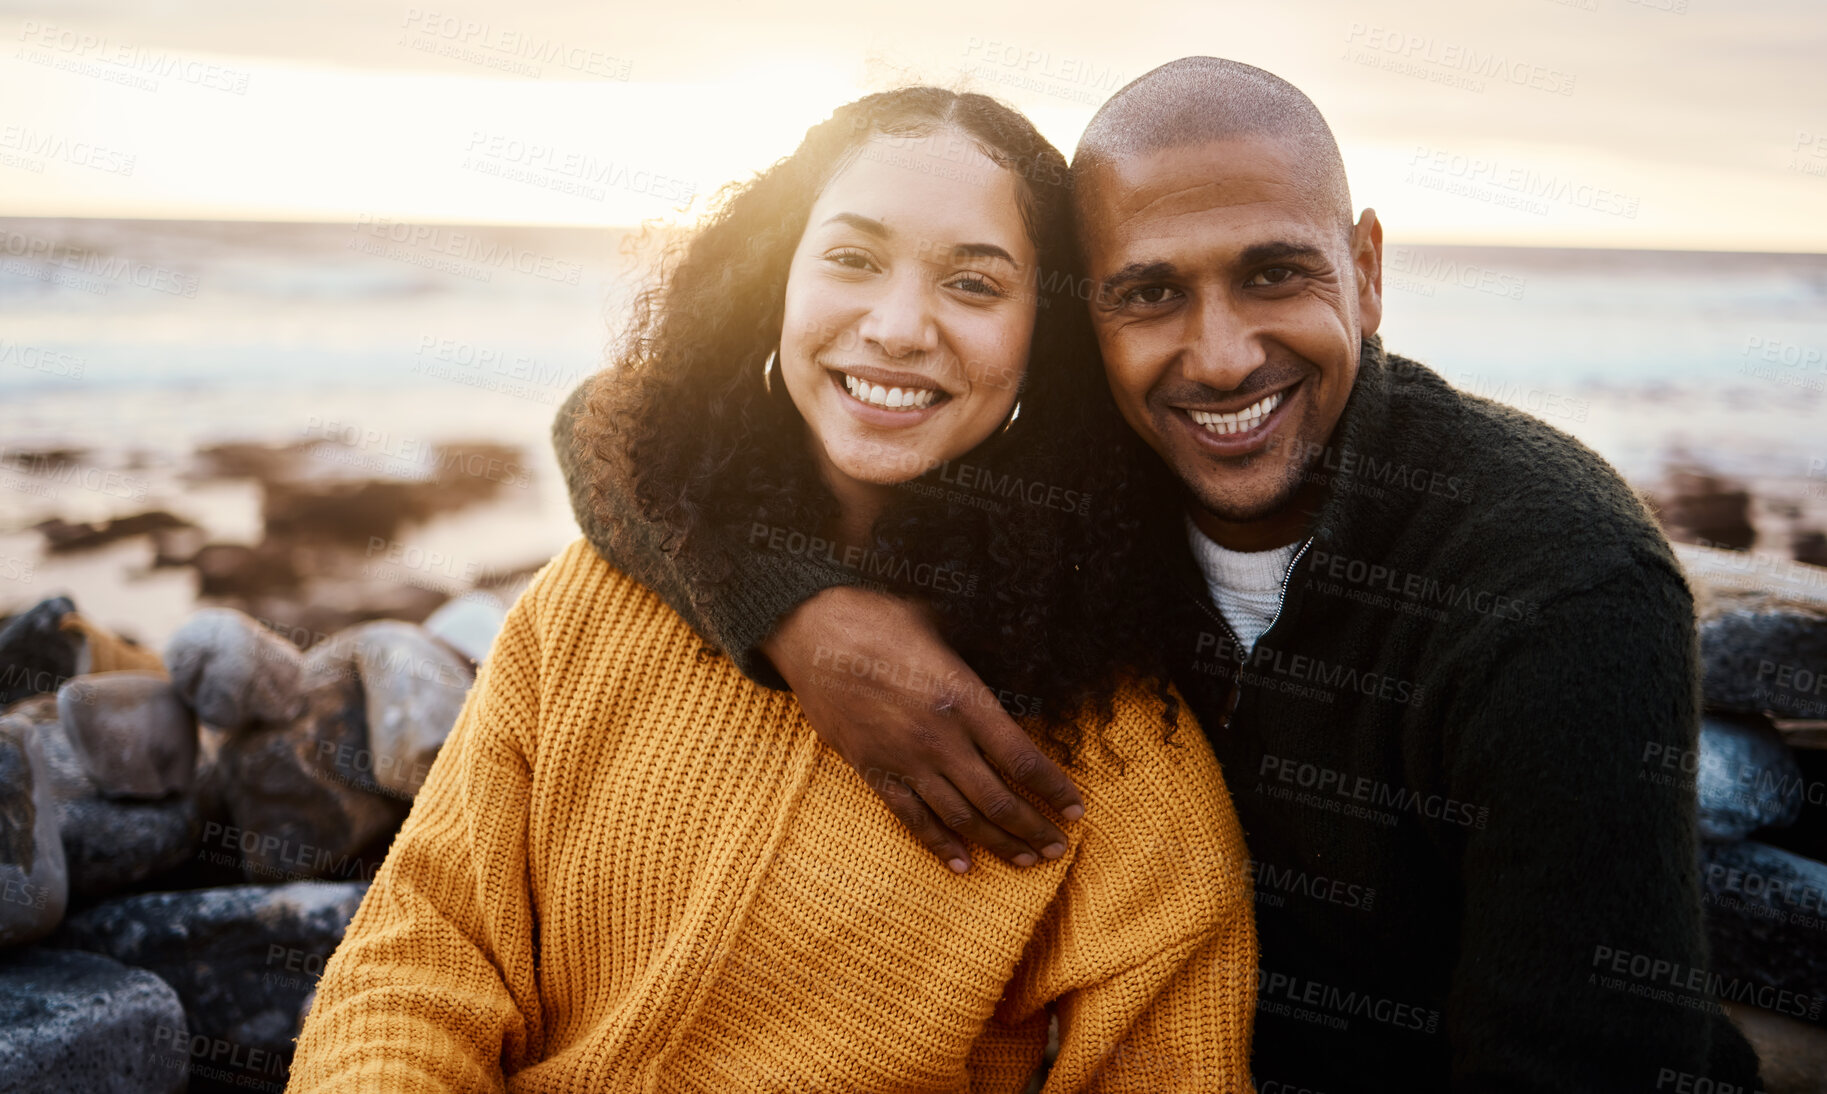 Buy stock photo Romantic, happy and portrait of a couple at the beach for a date, bonding or sunset in Bali. Love, hug and young man and woman smiling while relaxing at the ocean for vacation or an anniversary